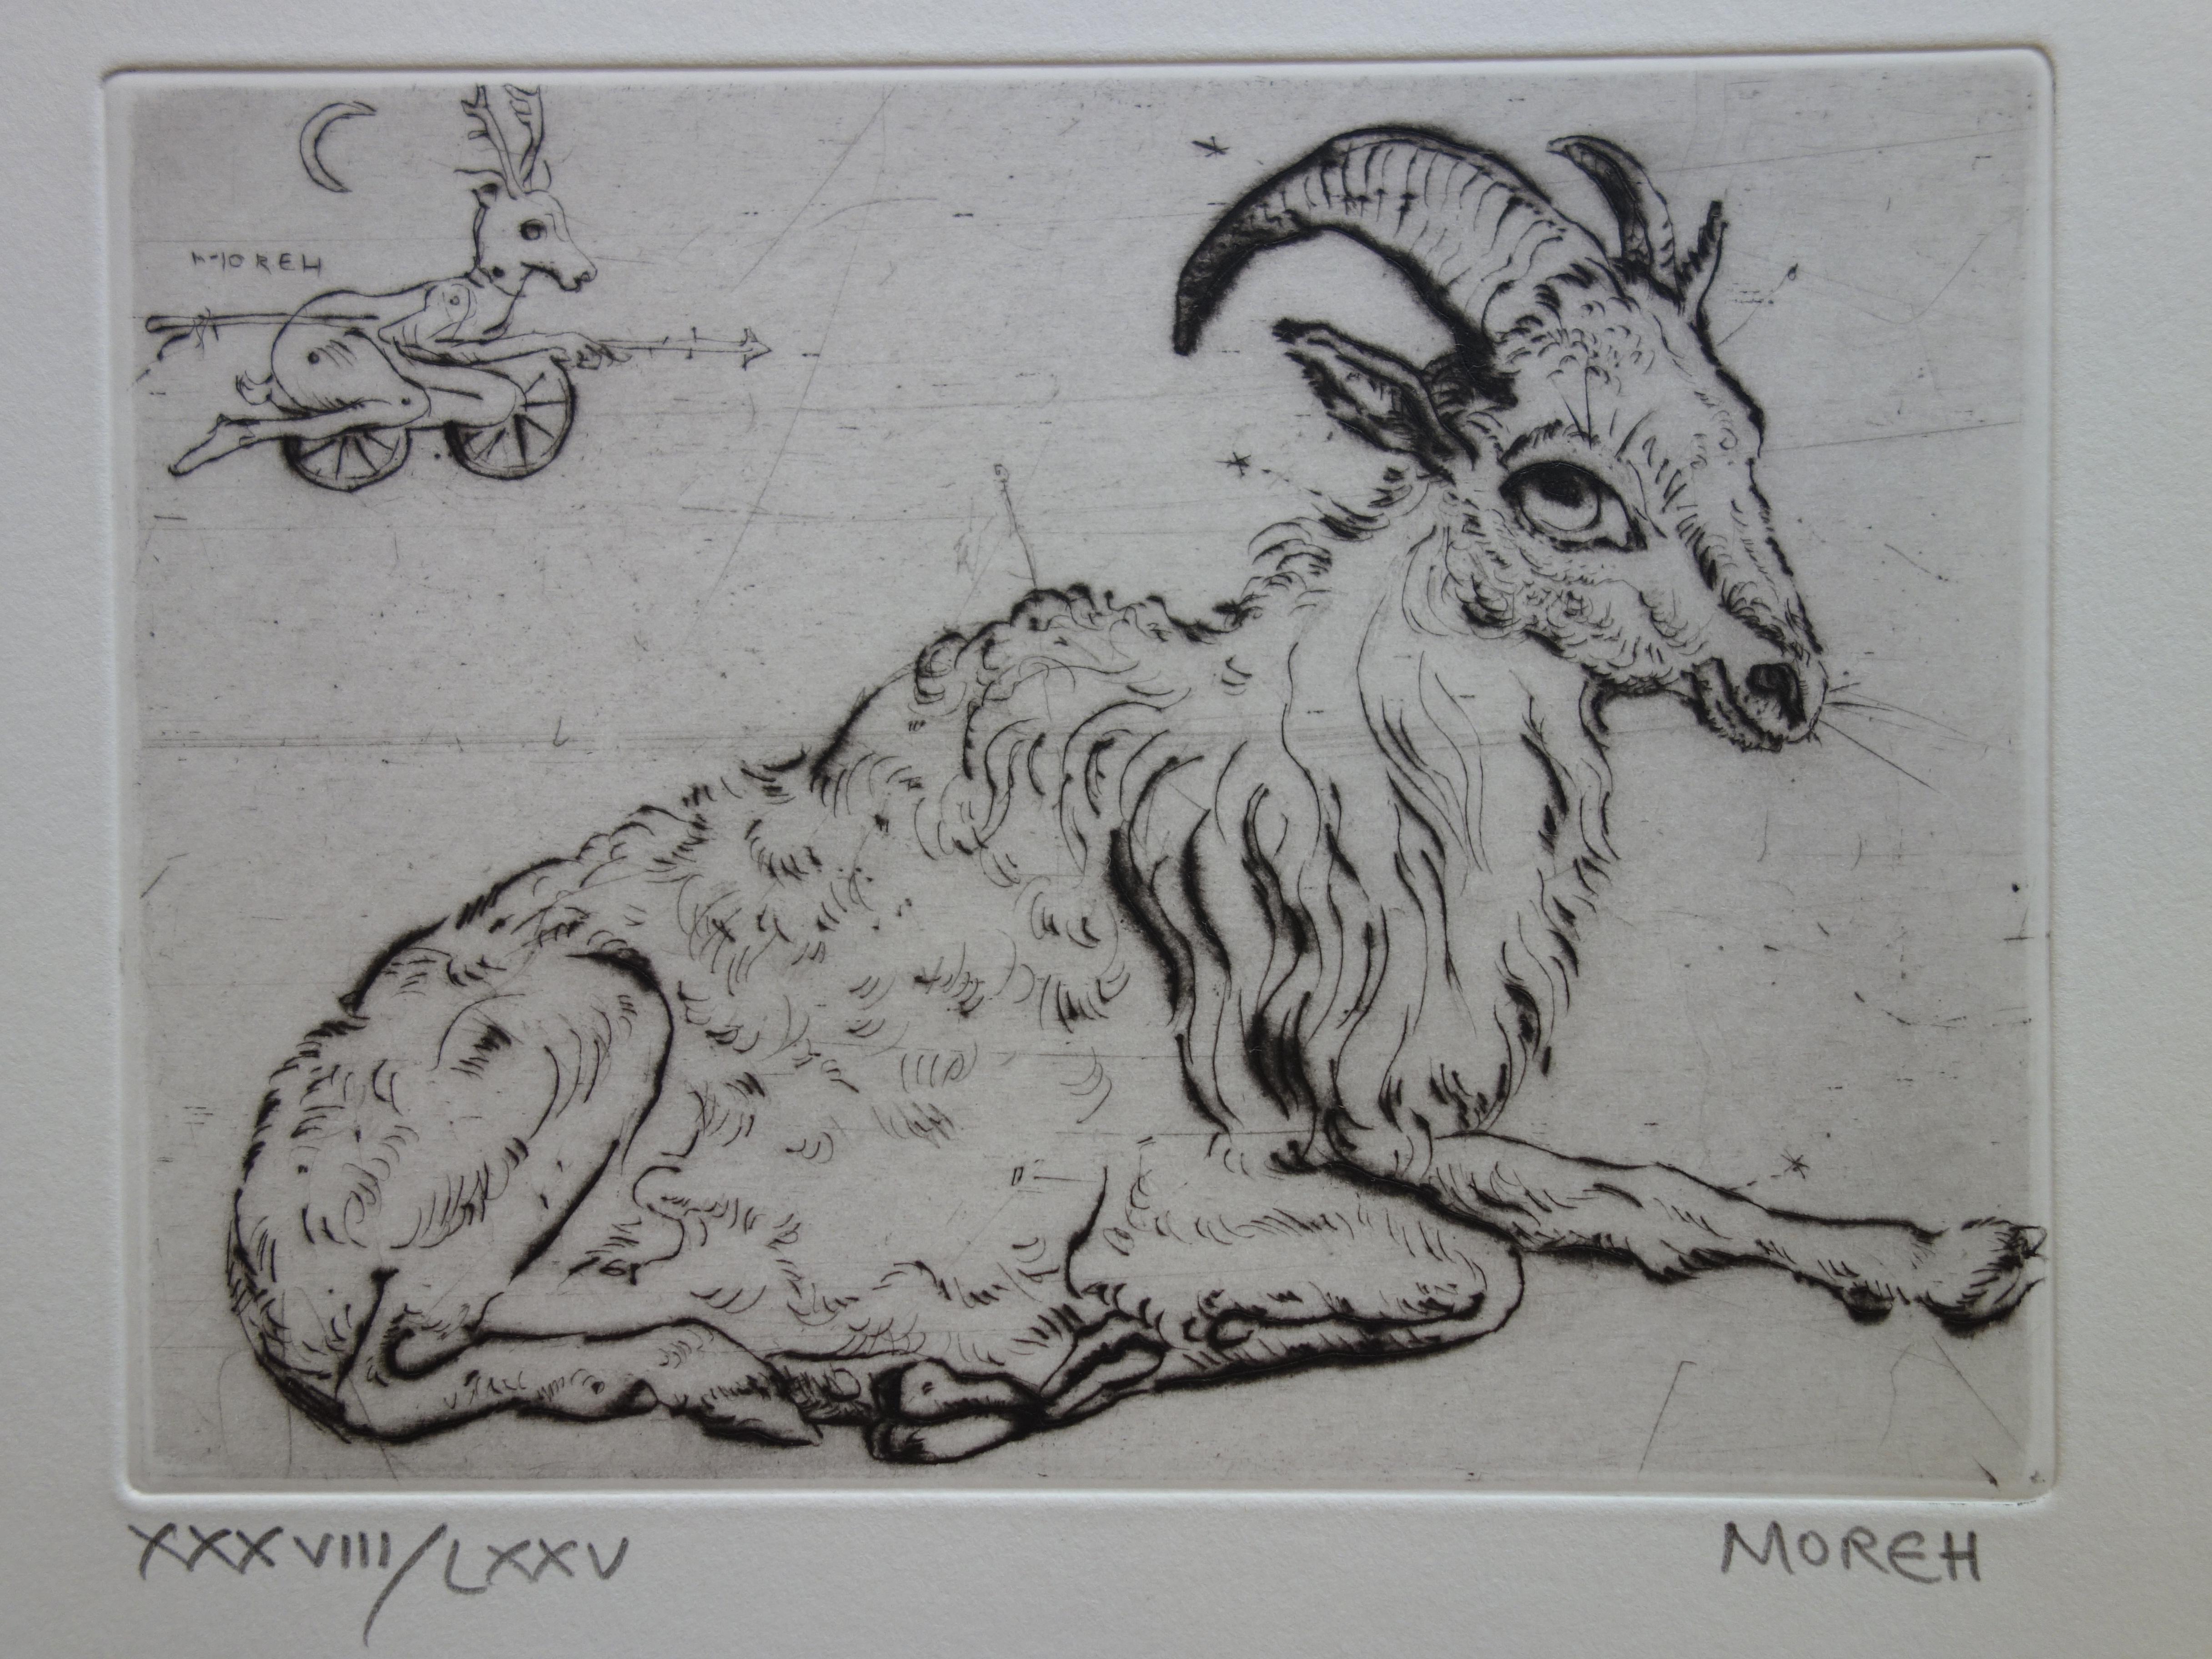 Relaxing Billy Goat - Etching, Ltd 75 copies - Print by Mordecai Moreh